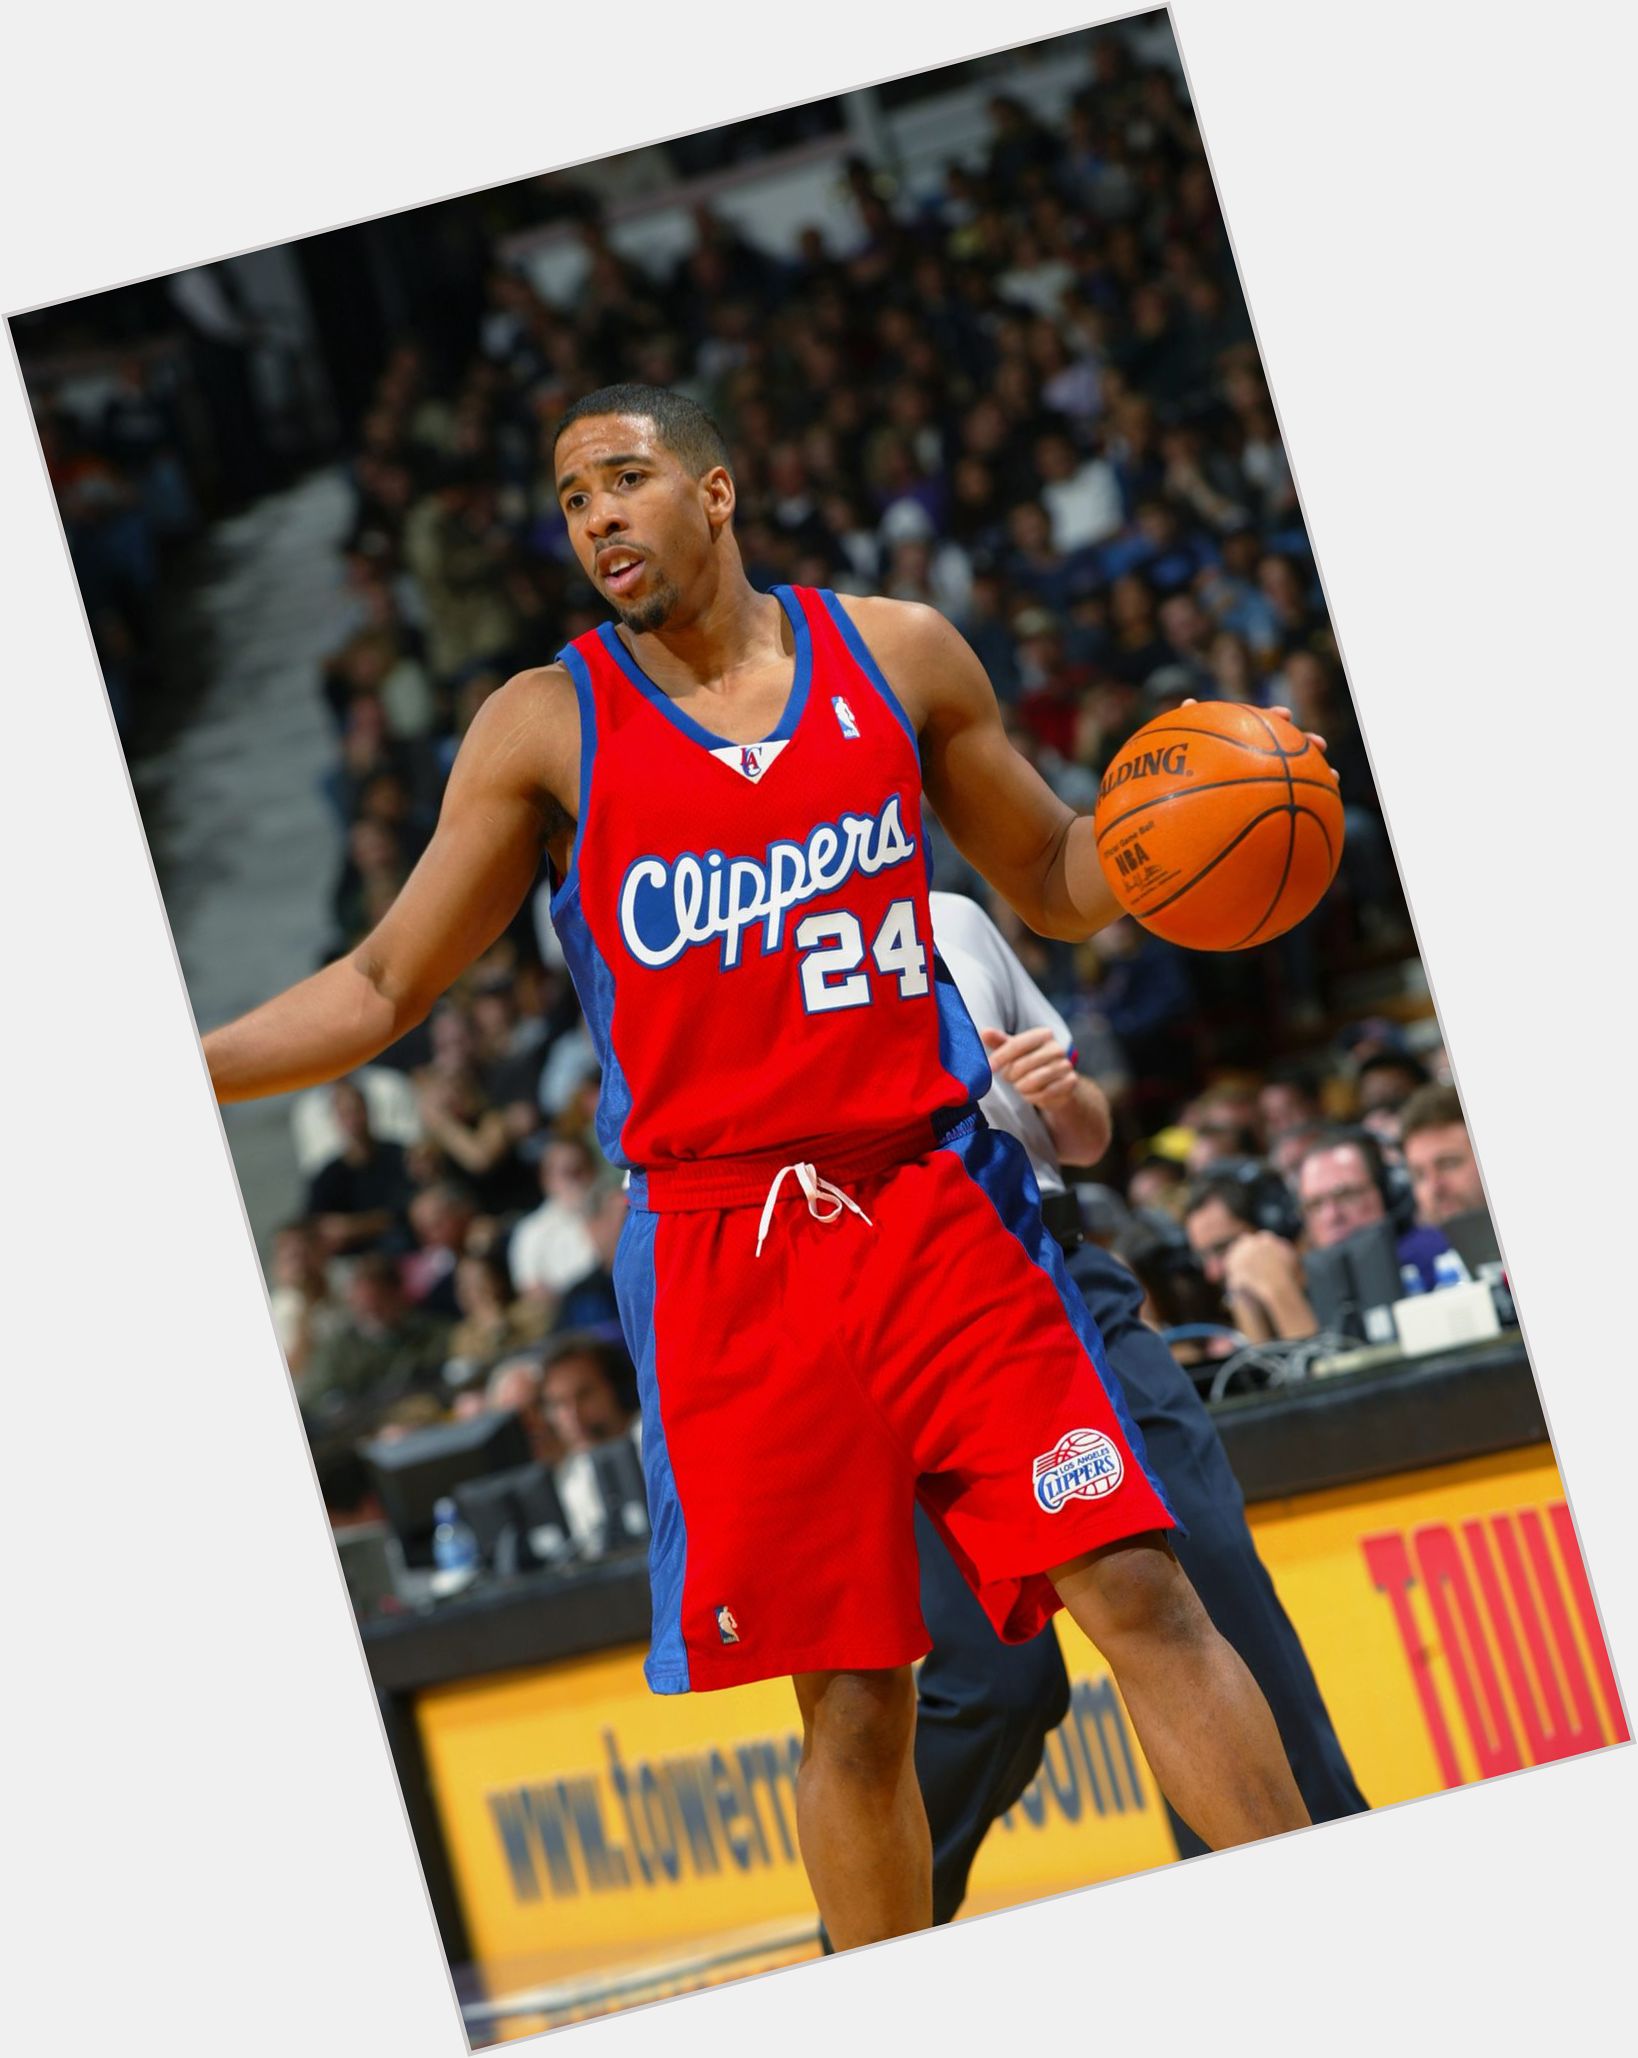 <a href="/hot-men/andre-miller/where-dating-news-photos">Andre Miller</a>  